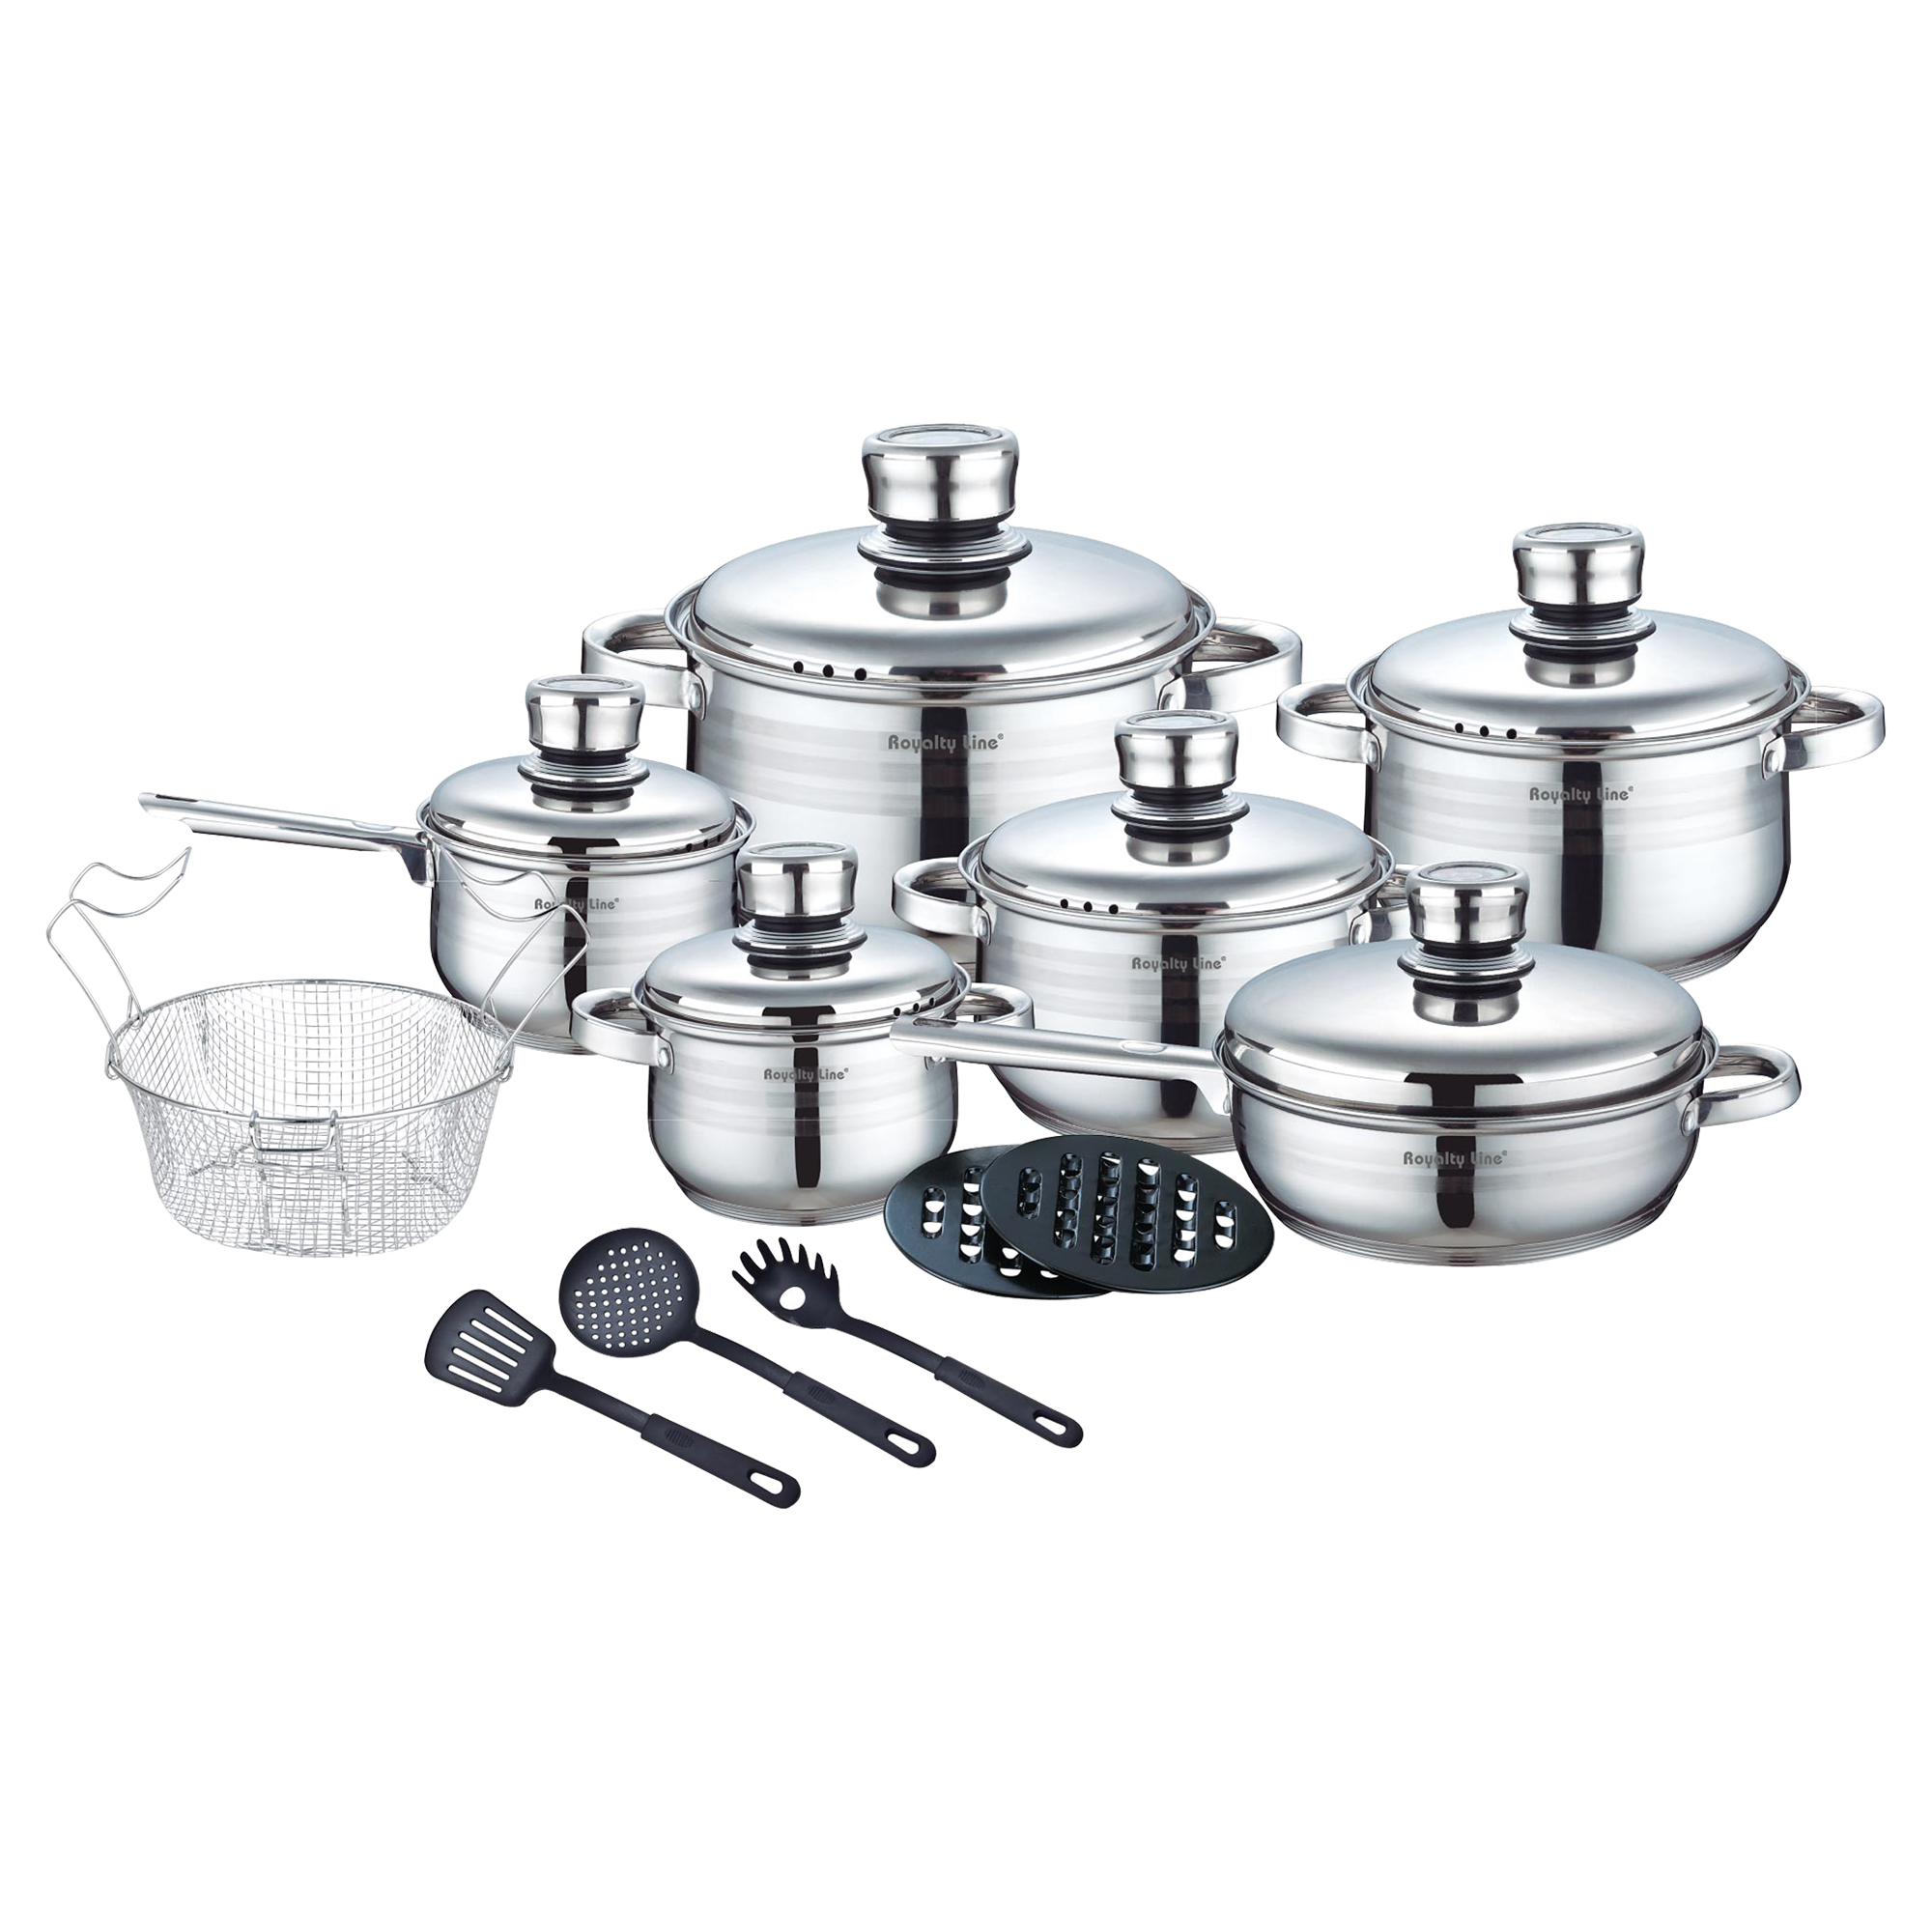 Royalty Line RL-1802: 18 Pieces Stainless Steel Cookware Set w/ Various Utensils